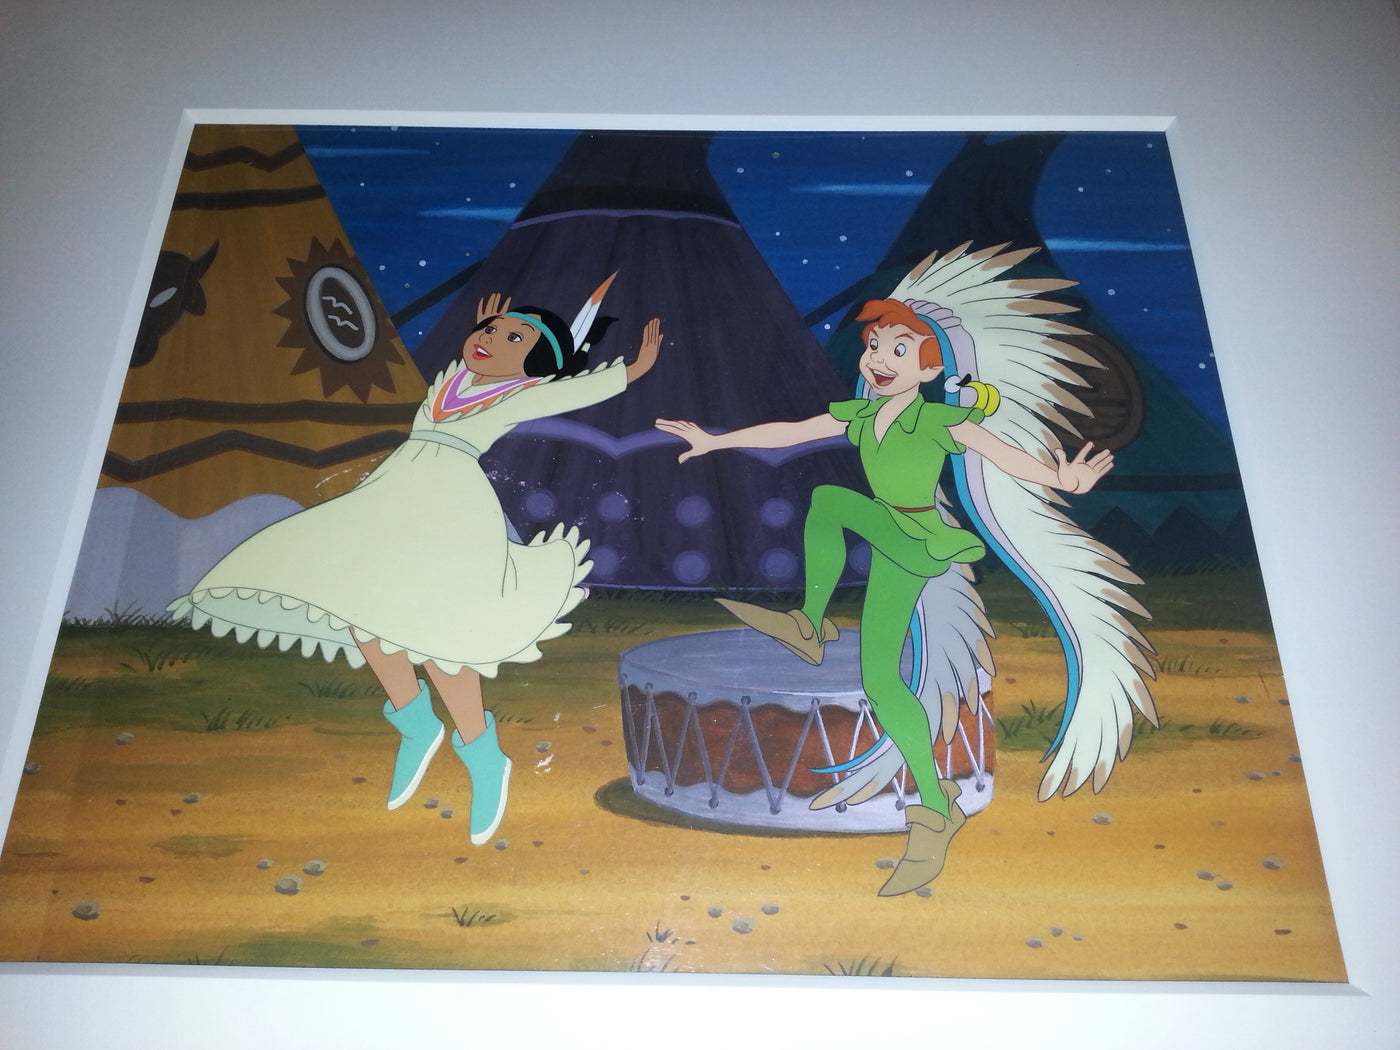 Original Walt Disney Production Cels on Custom Background from Peter Pan featuring Tiger Lily and Peter Pan